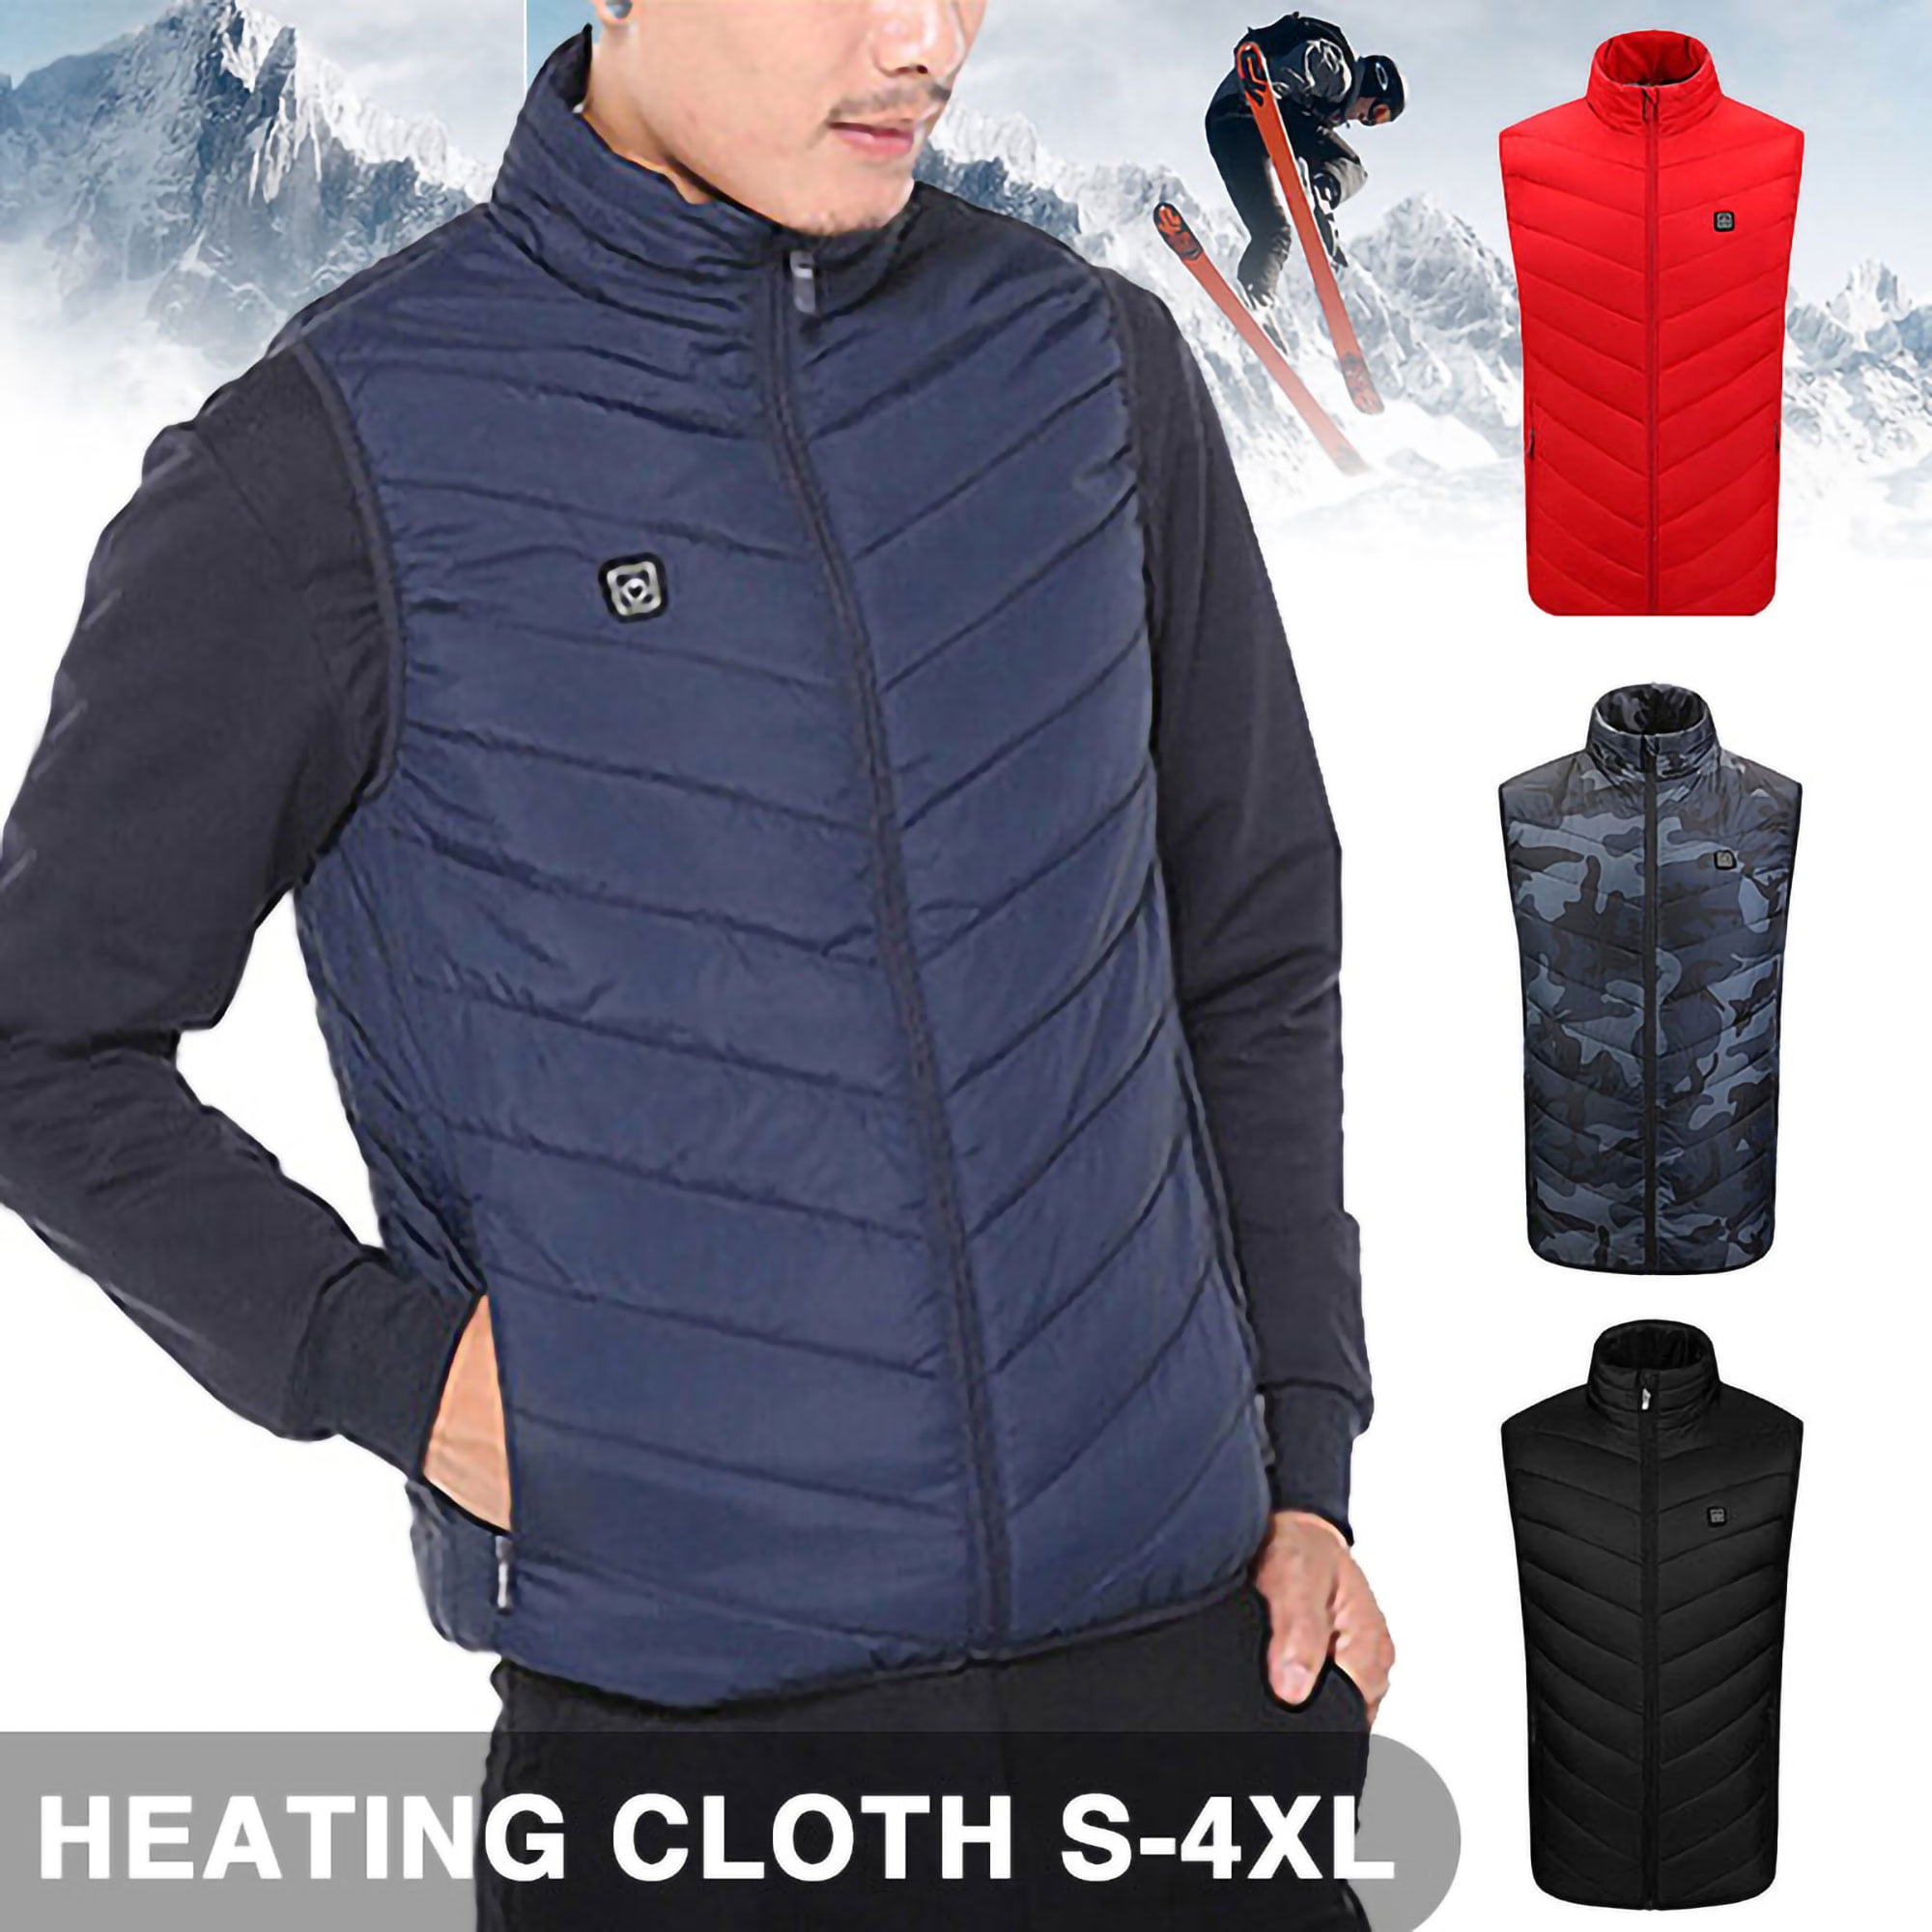 Heated Vest Charging Lightweight Heated Jacket with 9 Heating Zones 3 Temp Setting Heated Jacket Heating Body Warmer for Unisex Riding Camping Hiking Fishing Winter Outdoor Activity Long-lasting Warm 